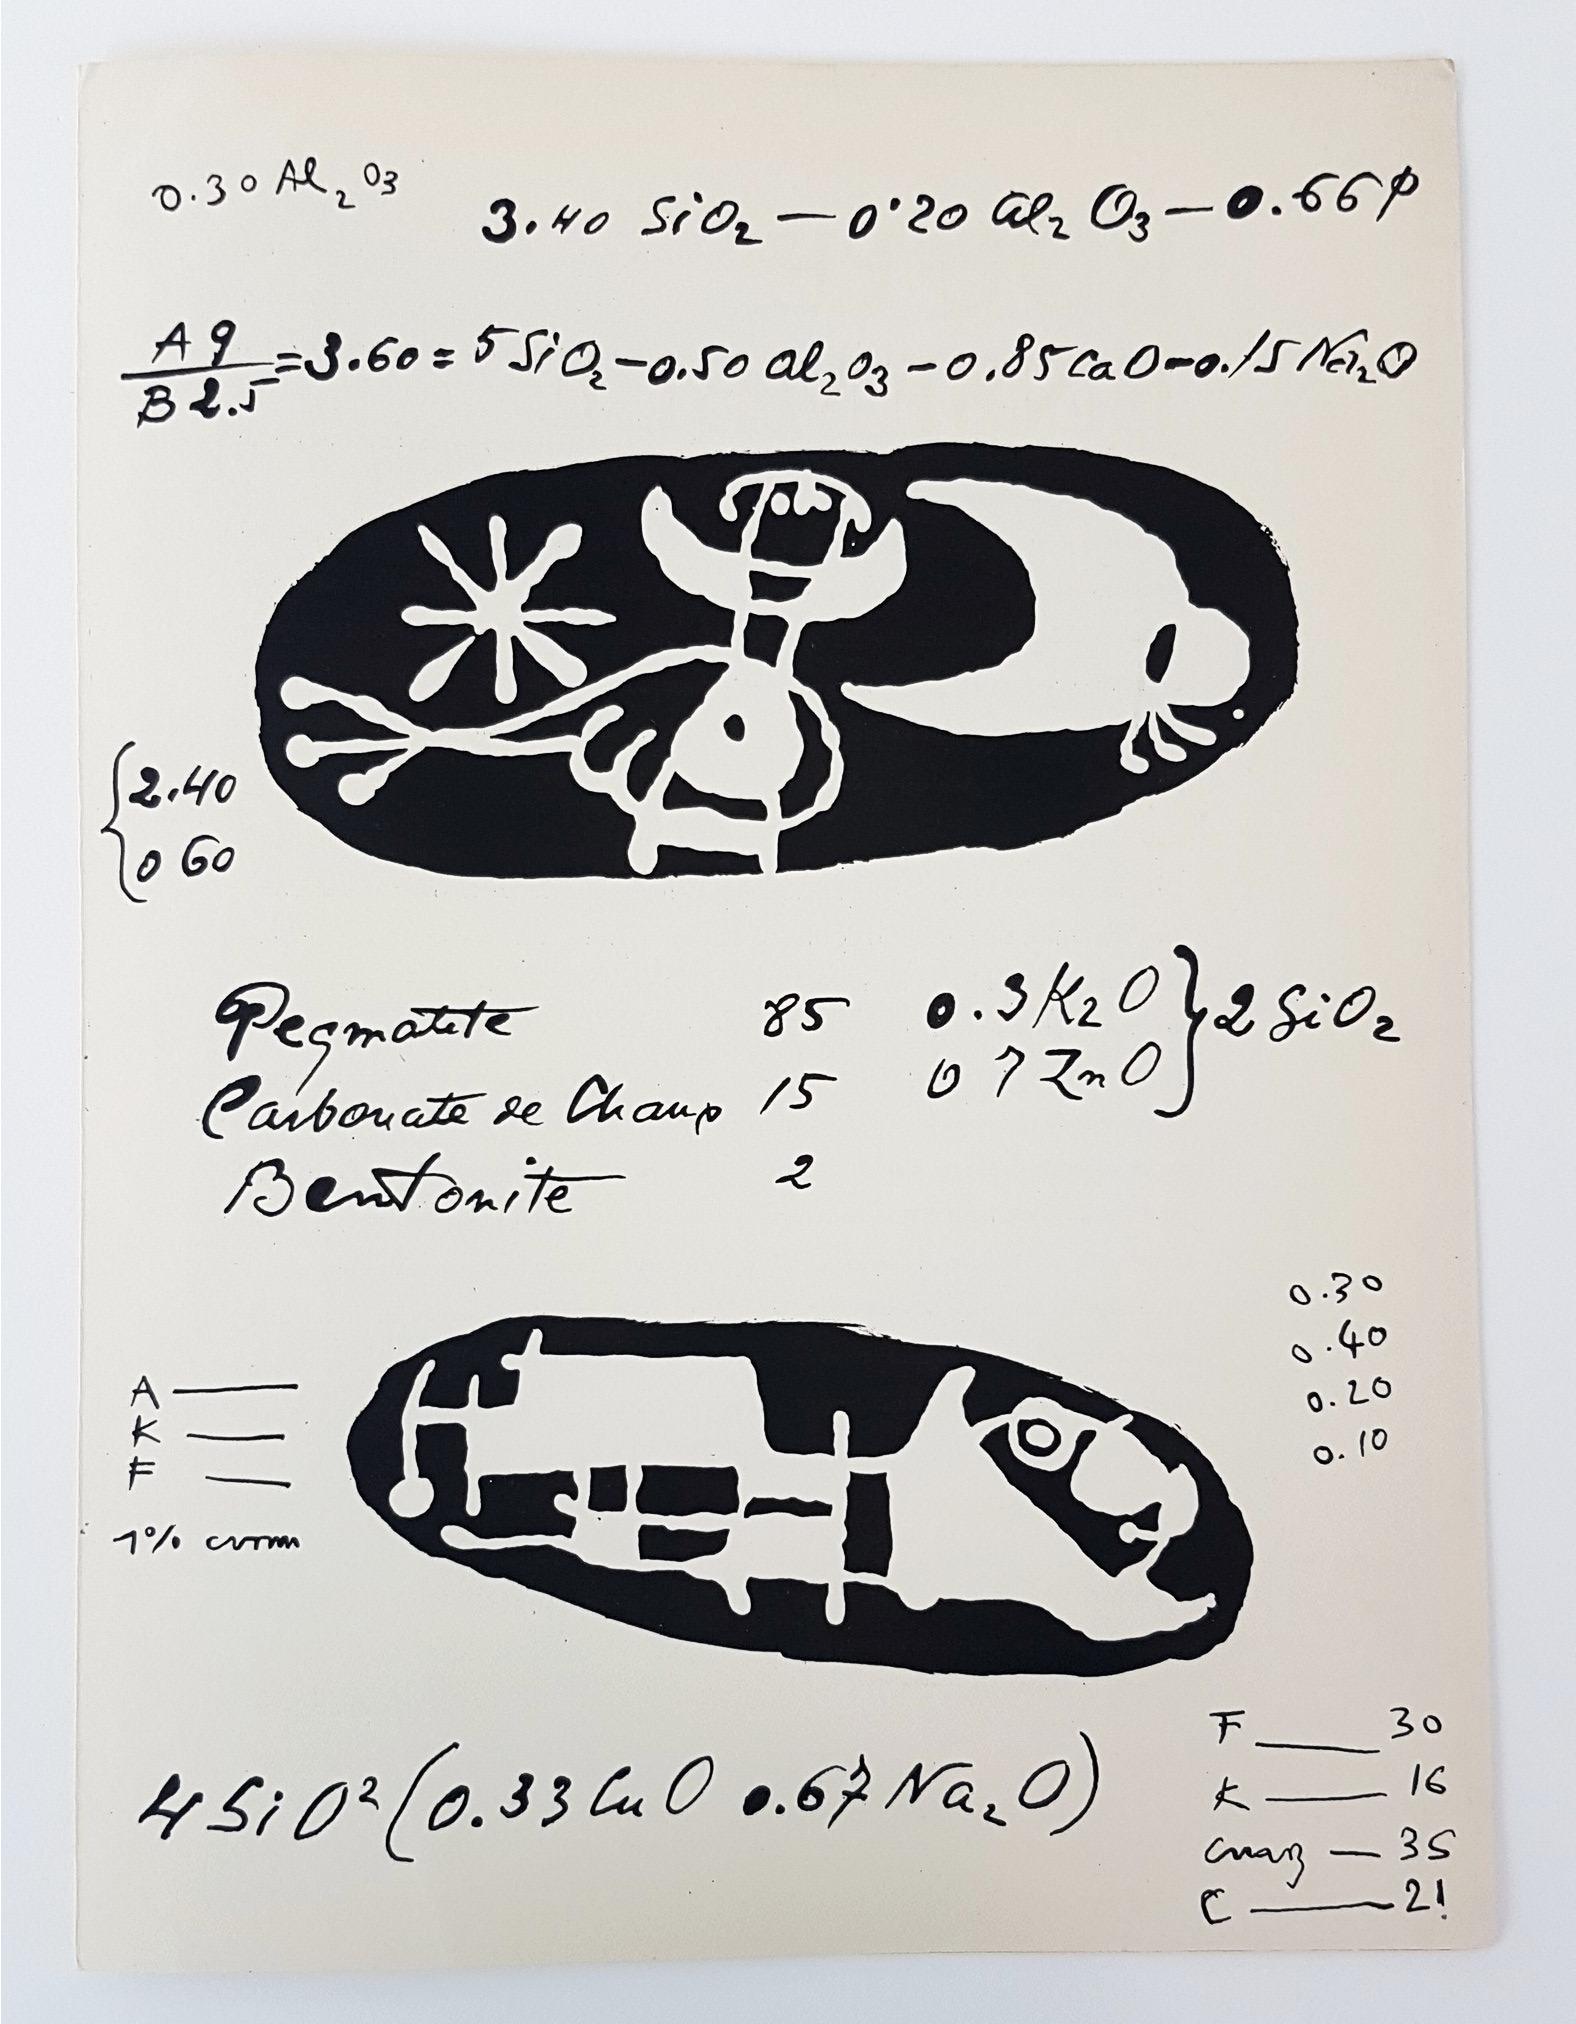 Lithographier Originale (one plate from Artigas) - Print by Joan Miró